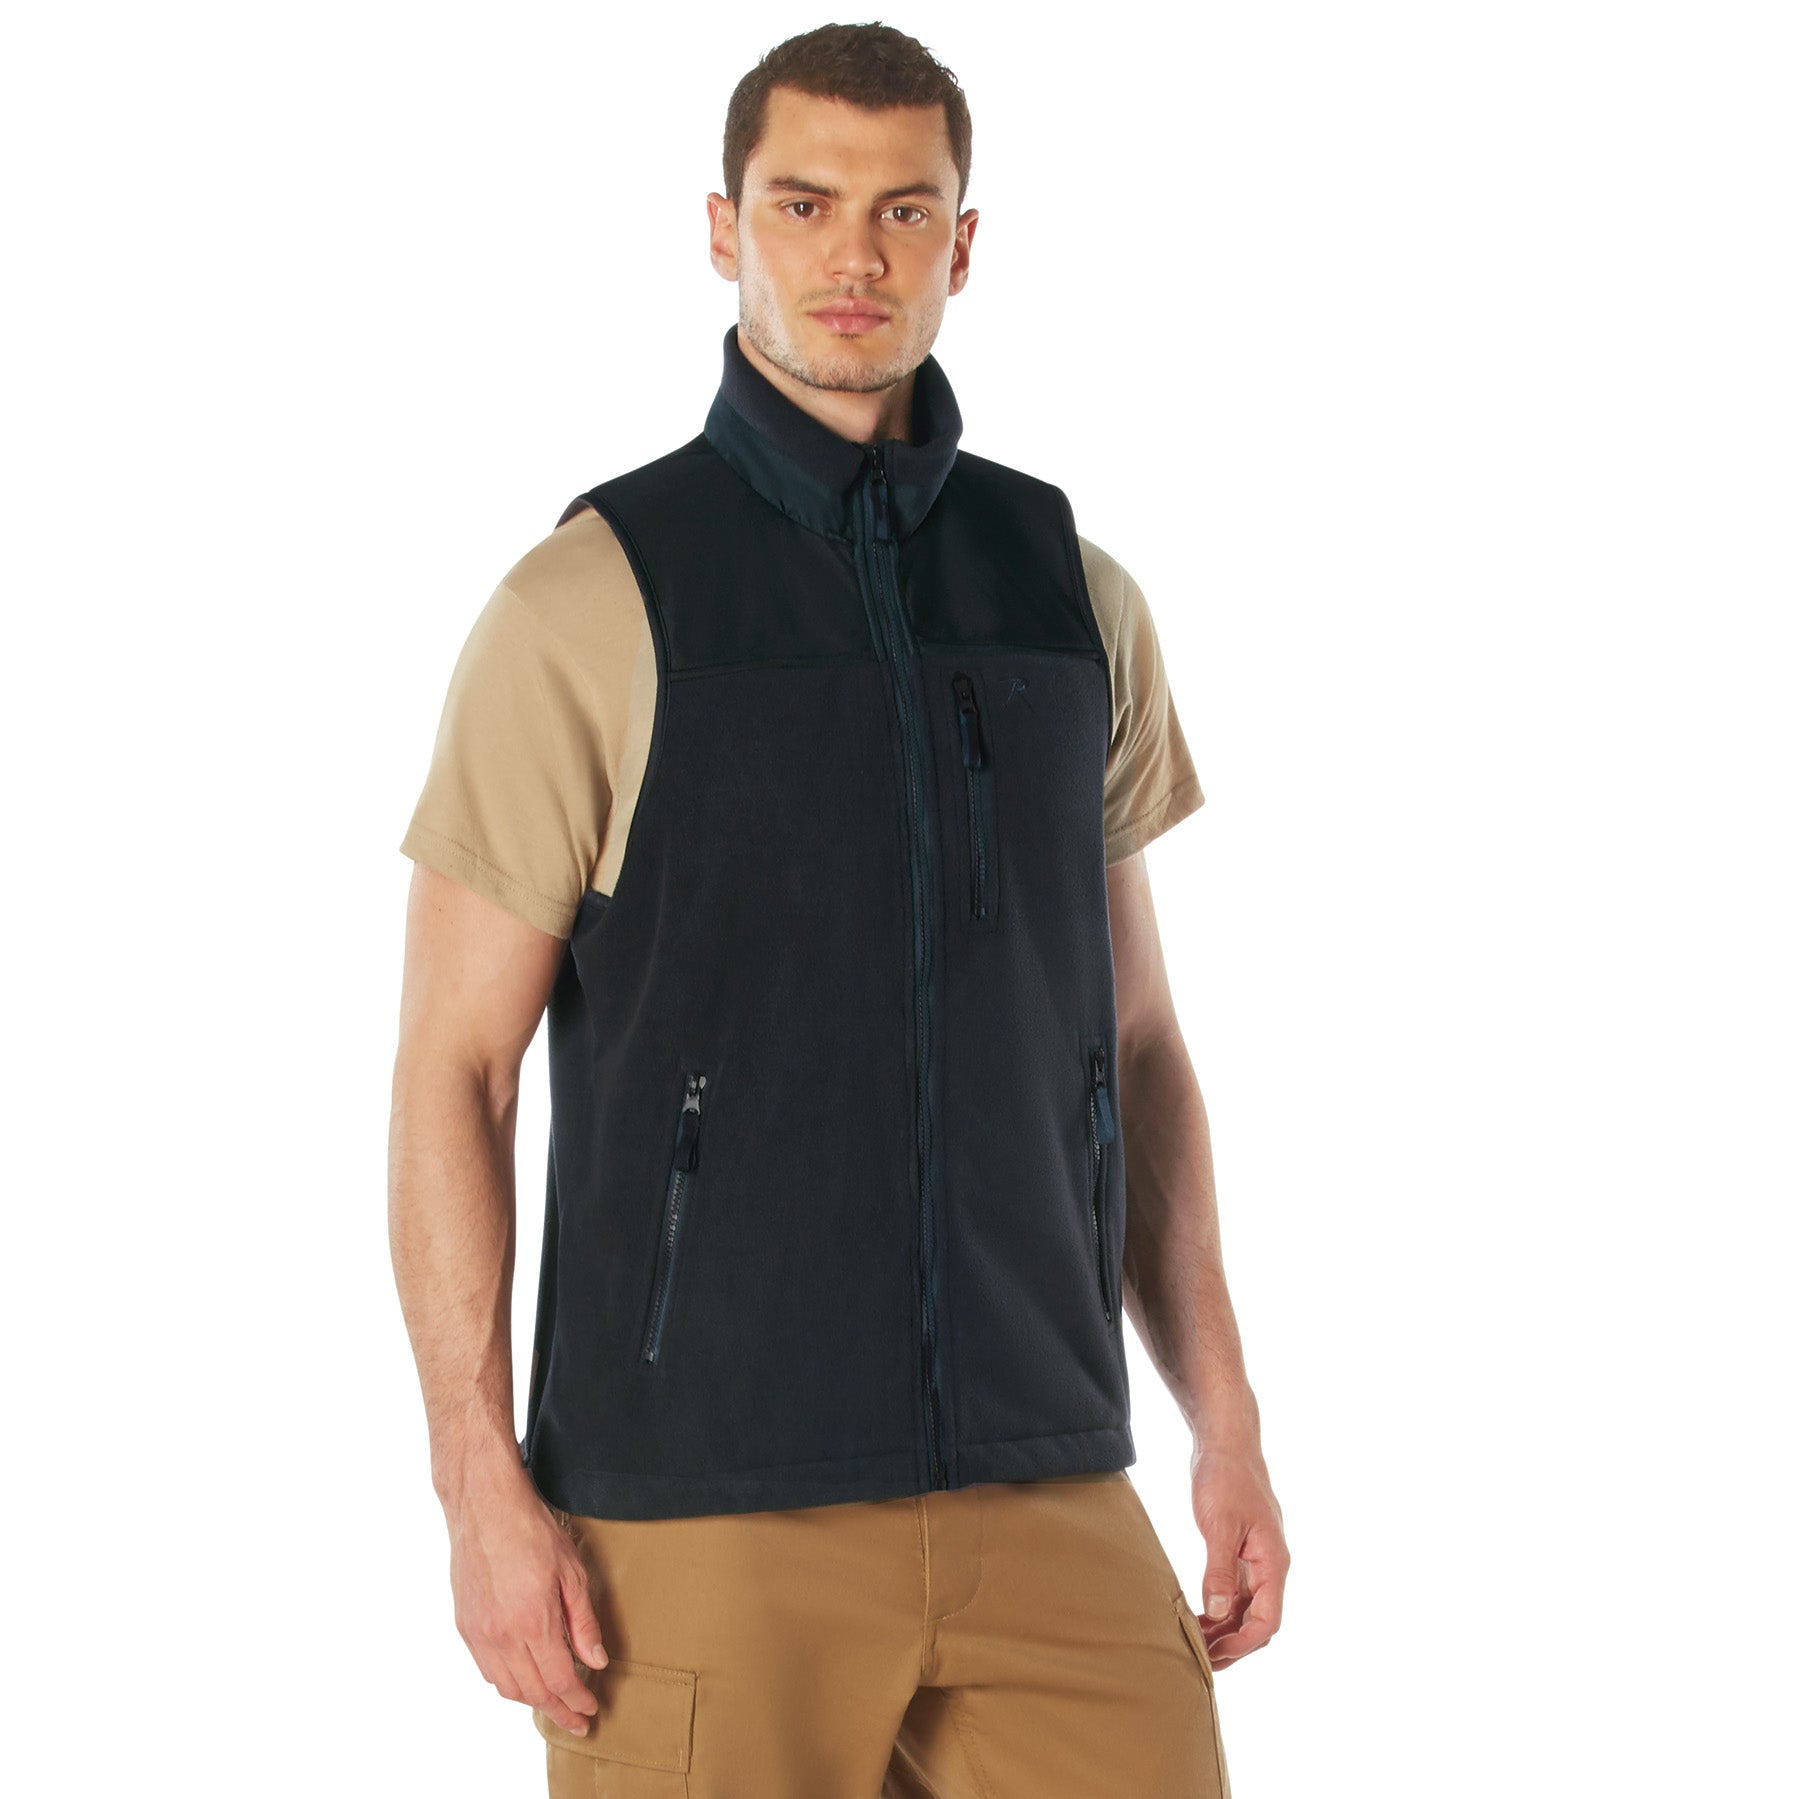 Rothco Spec Ops Tactical Vest - Tactical Choice Plus